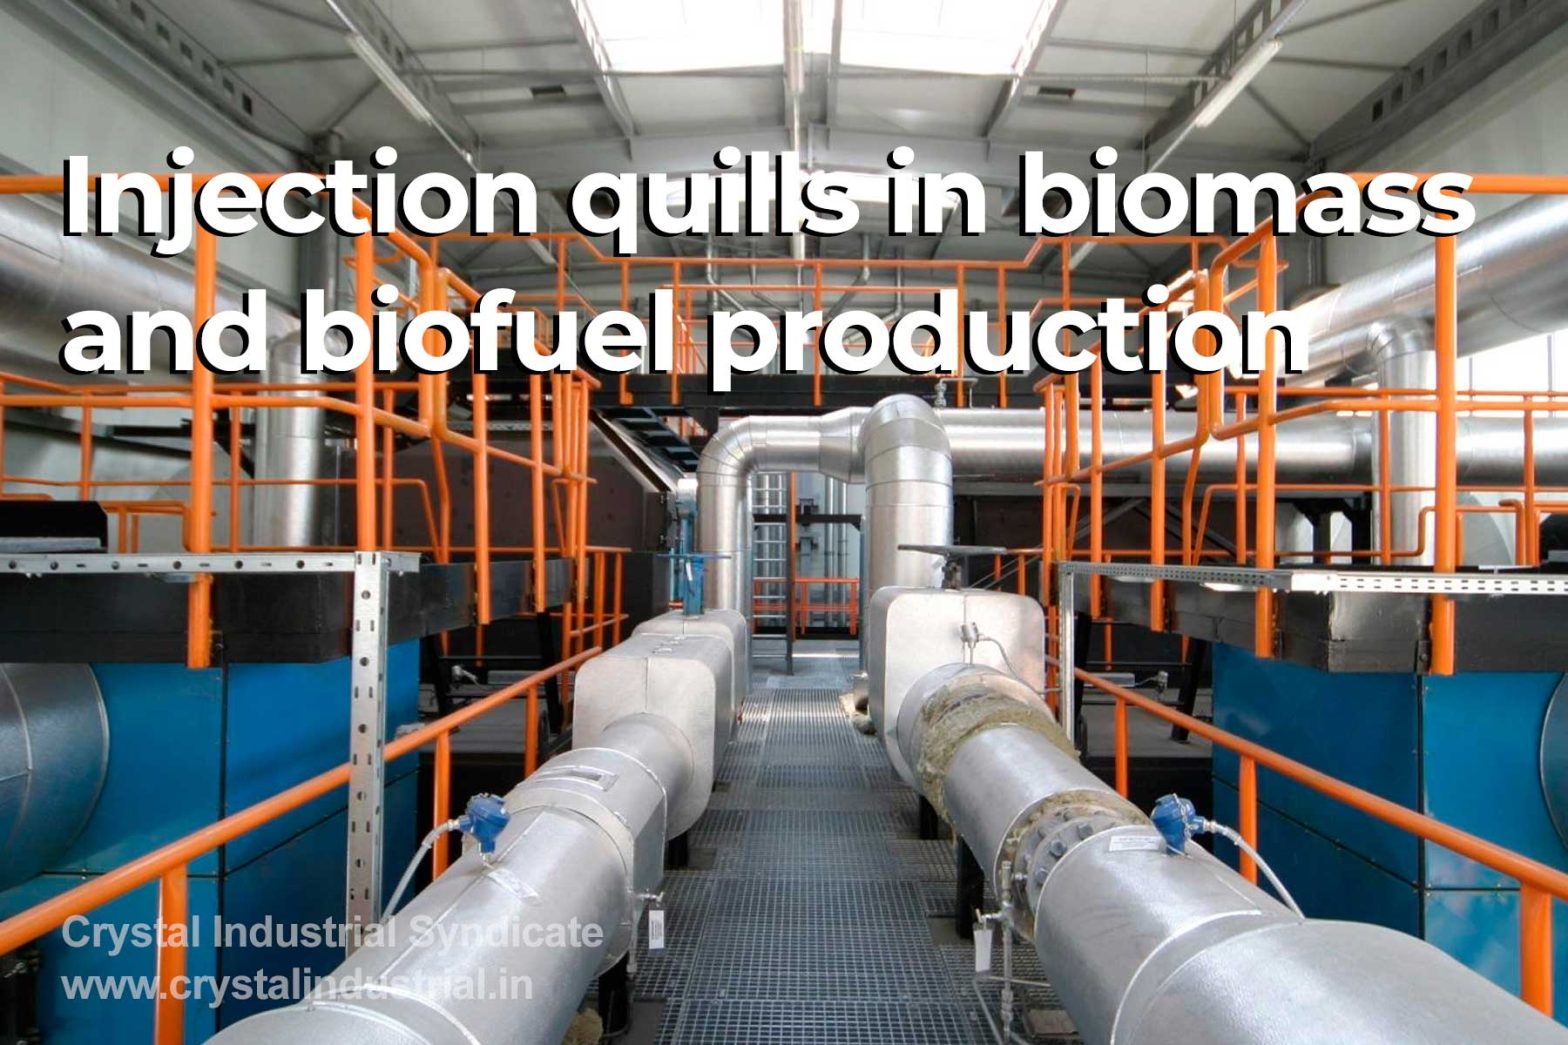 Challenges in using injection quills in biomass and biofuel production